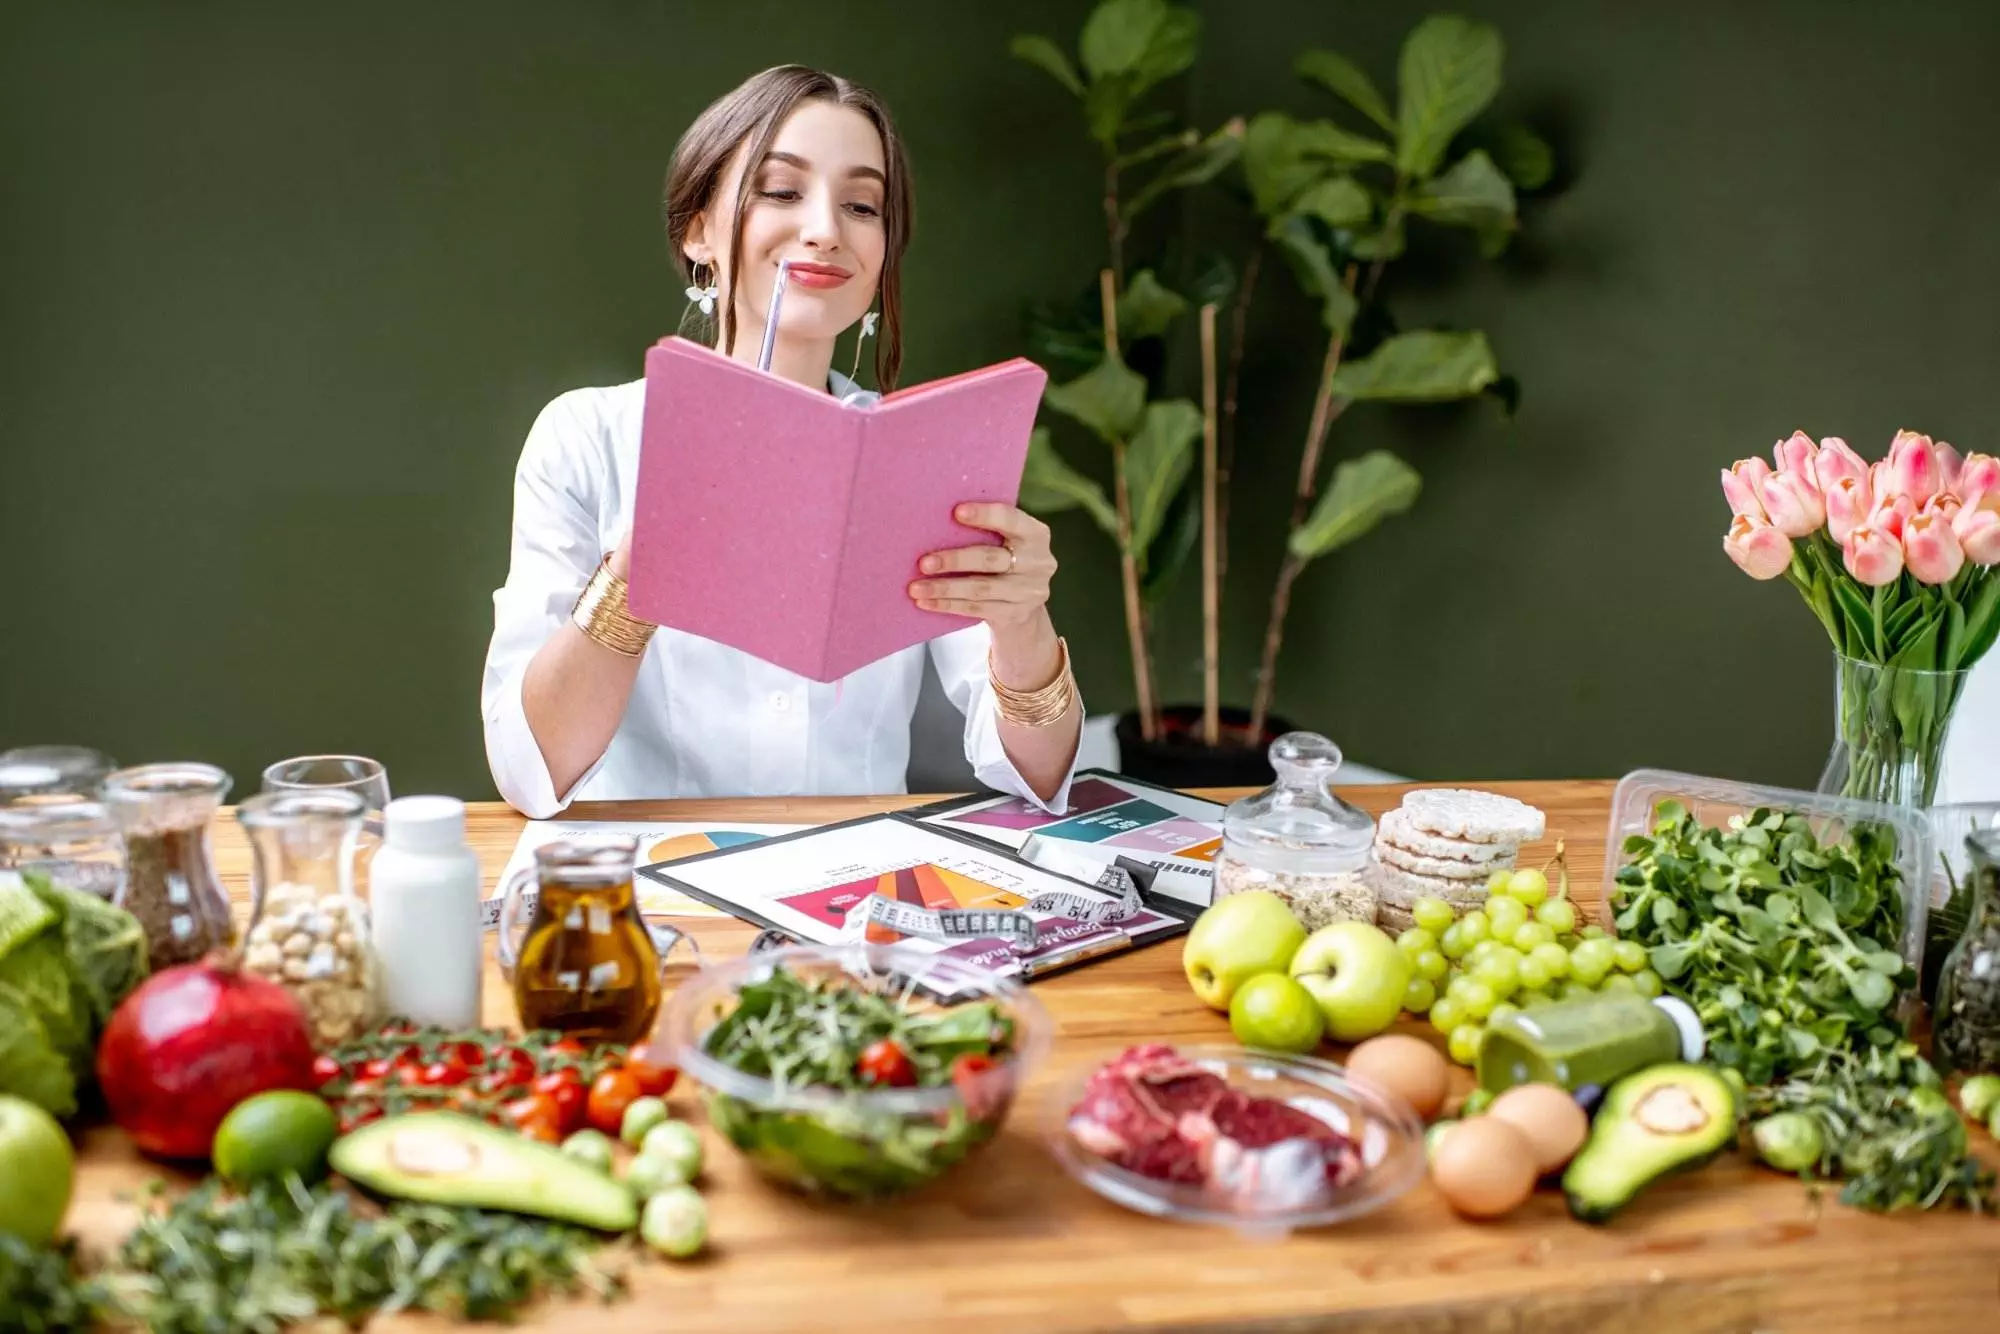 Woman reading recipe book amidst fresh groceries.